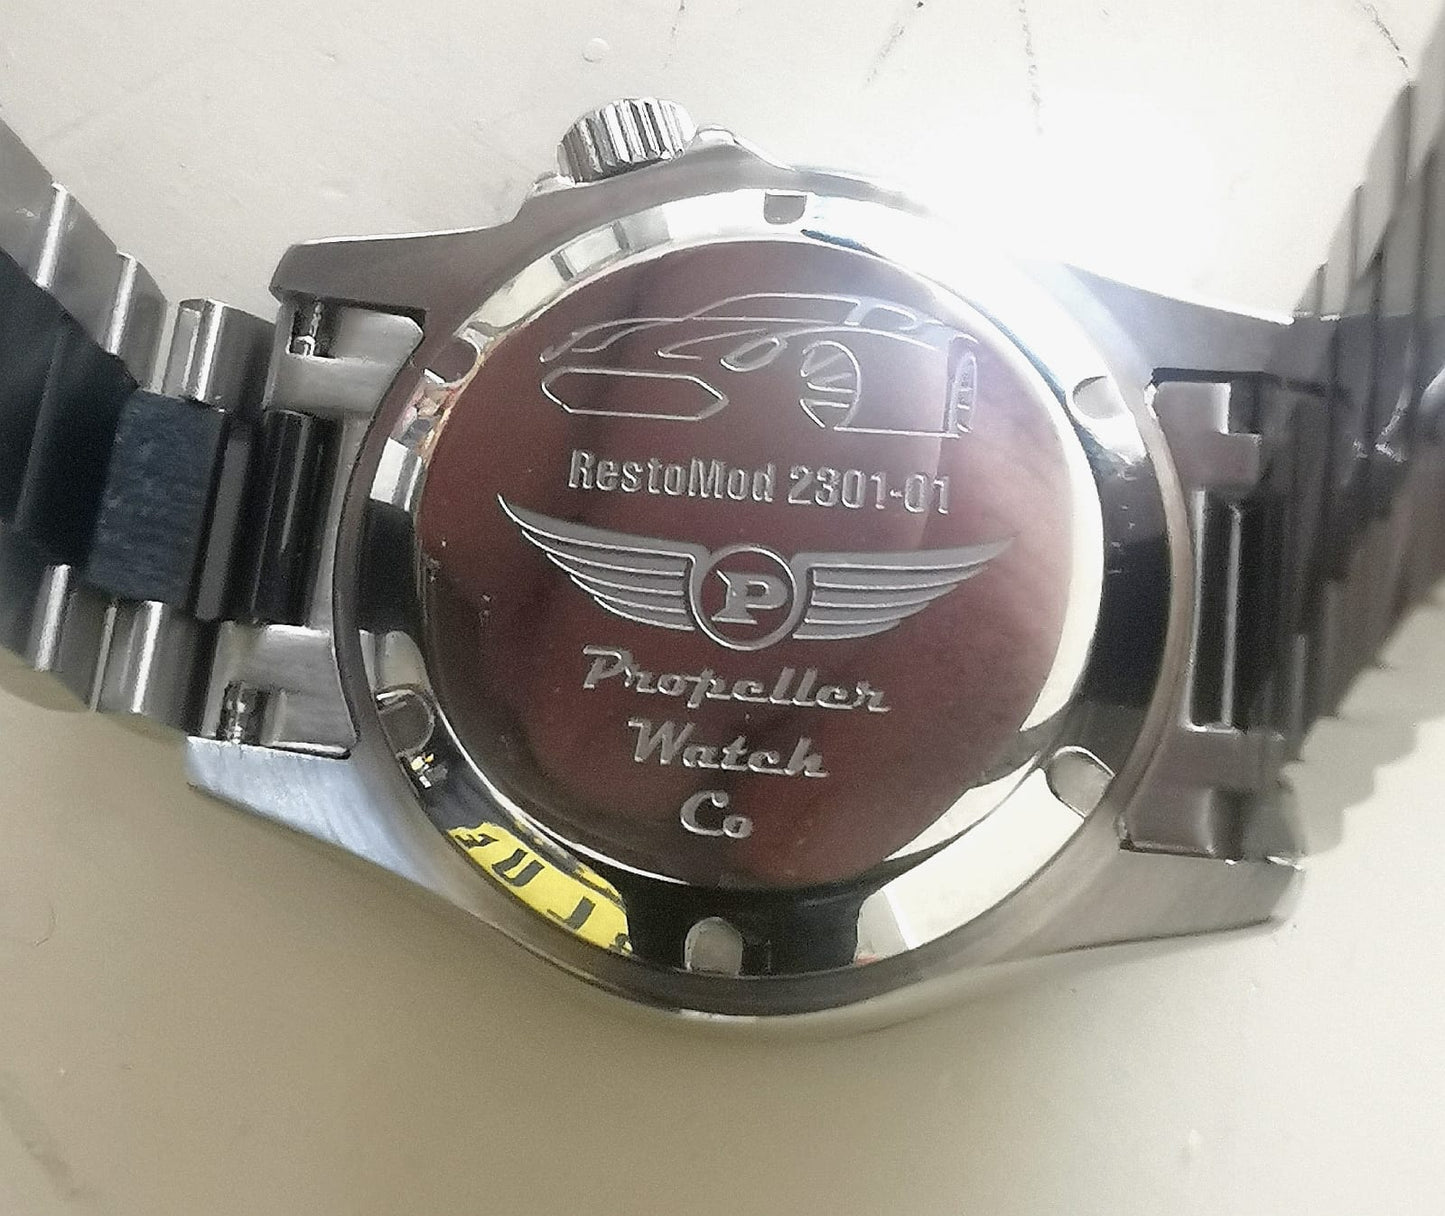 Propeller Watch company - RestoMod Collection.